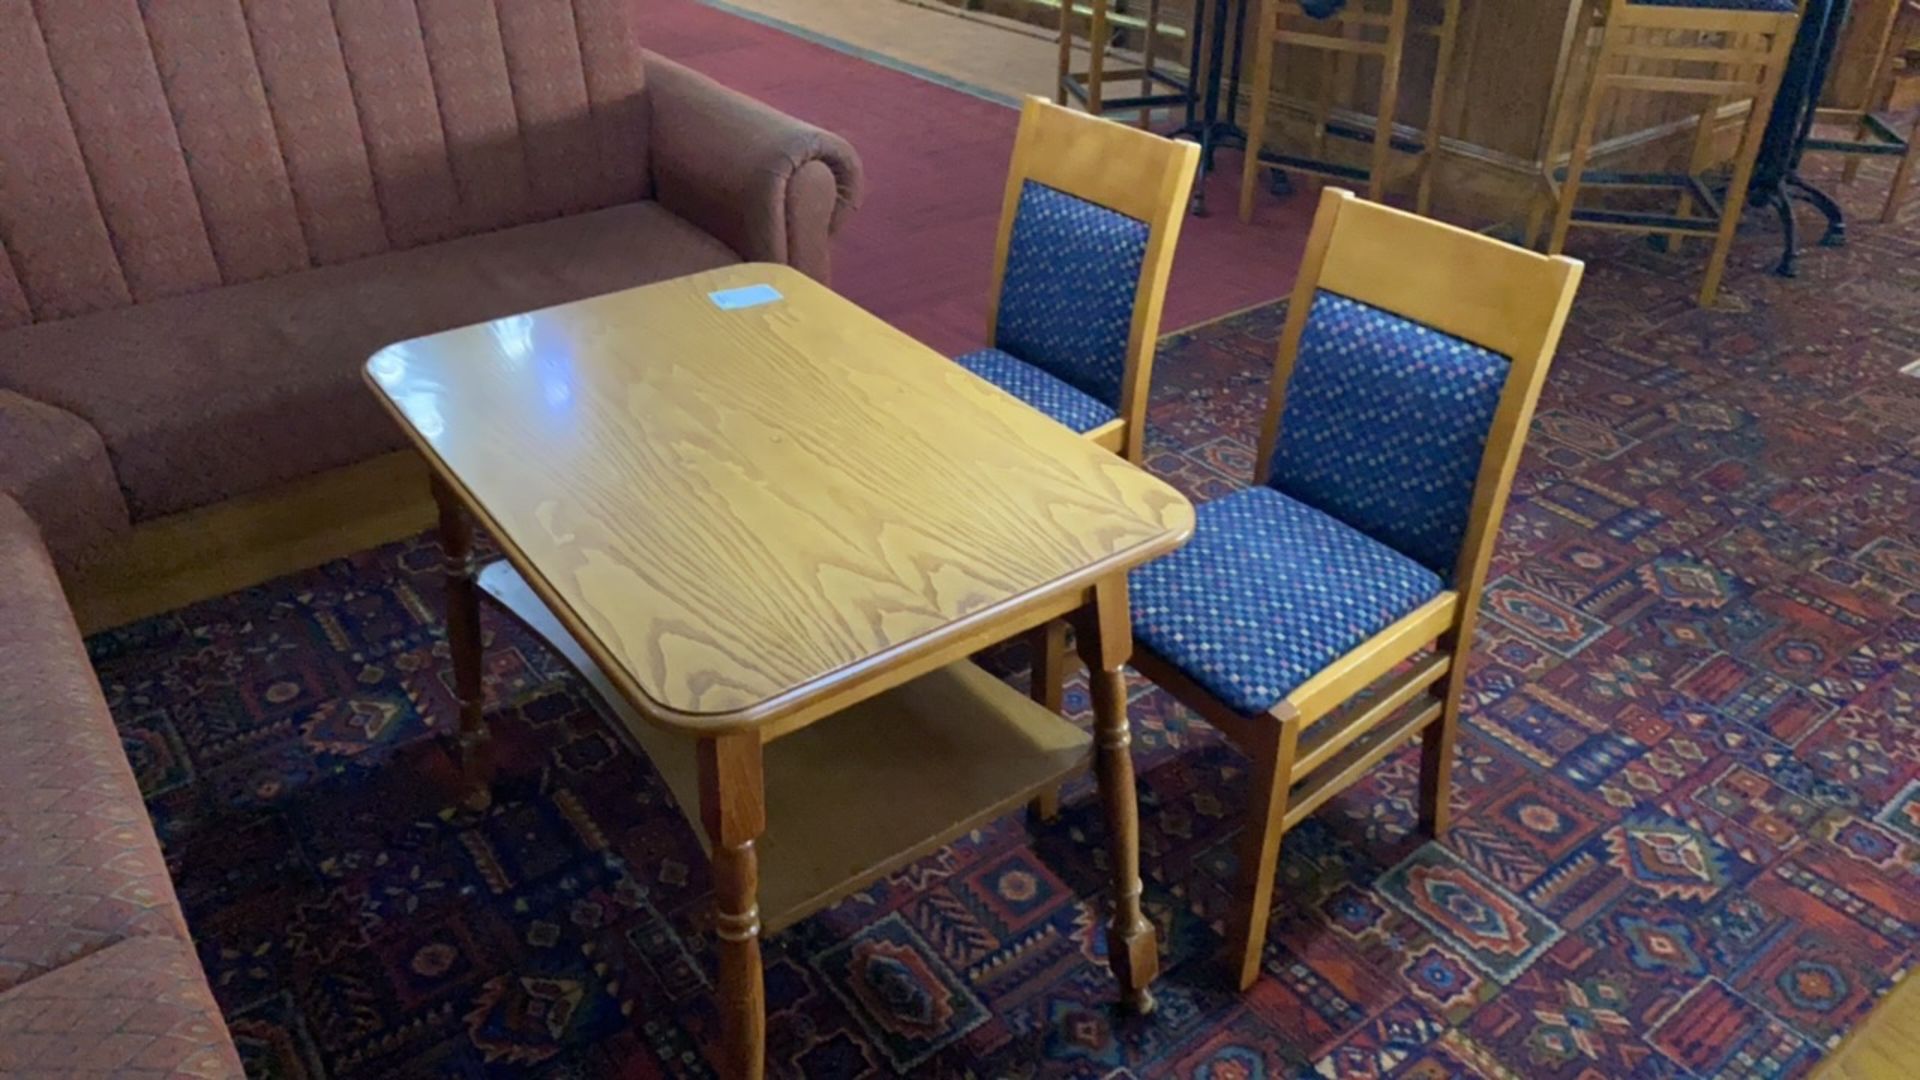 Wooden Rectangular Table With Two Wooden Framed Chairs - Image 4 of 4